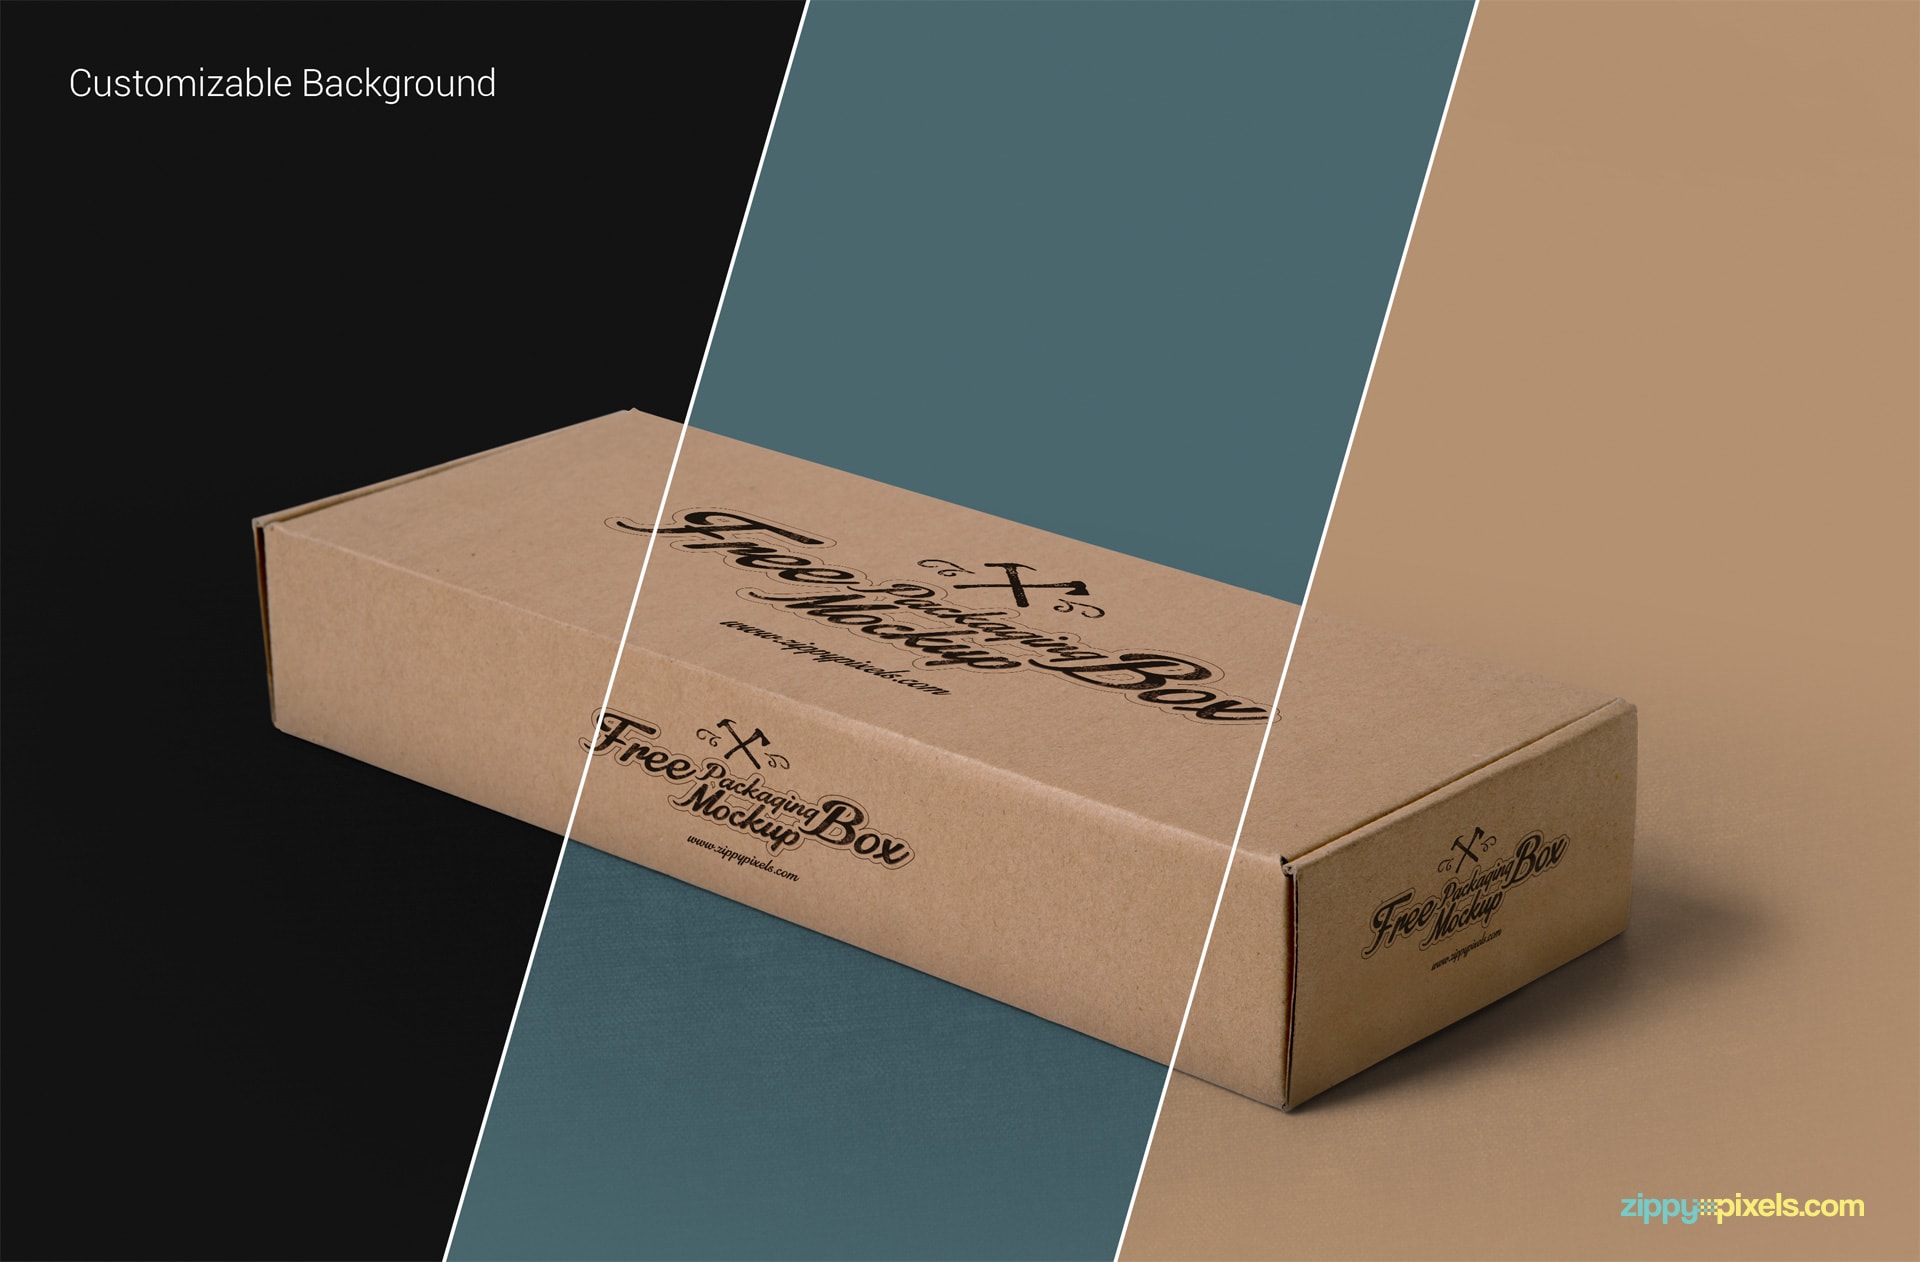 Showcase your designs realistically with these free packaging mockups.